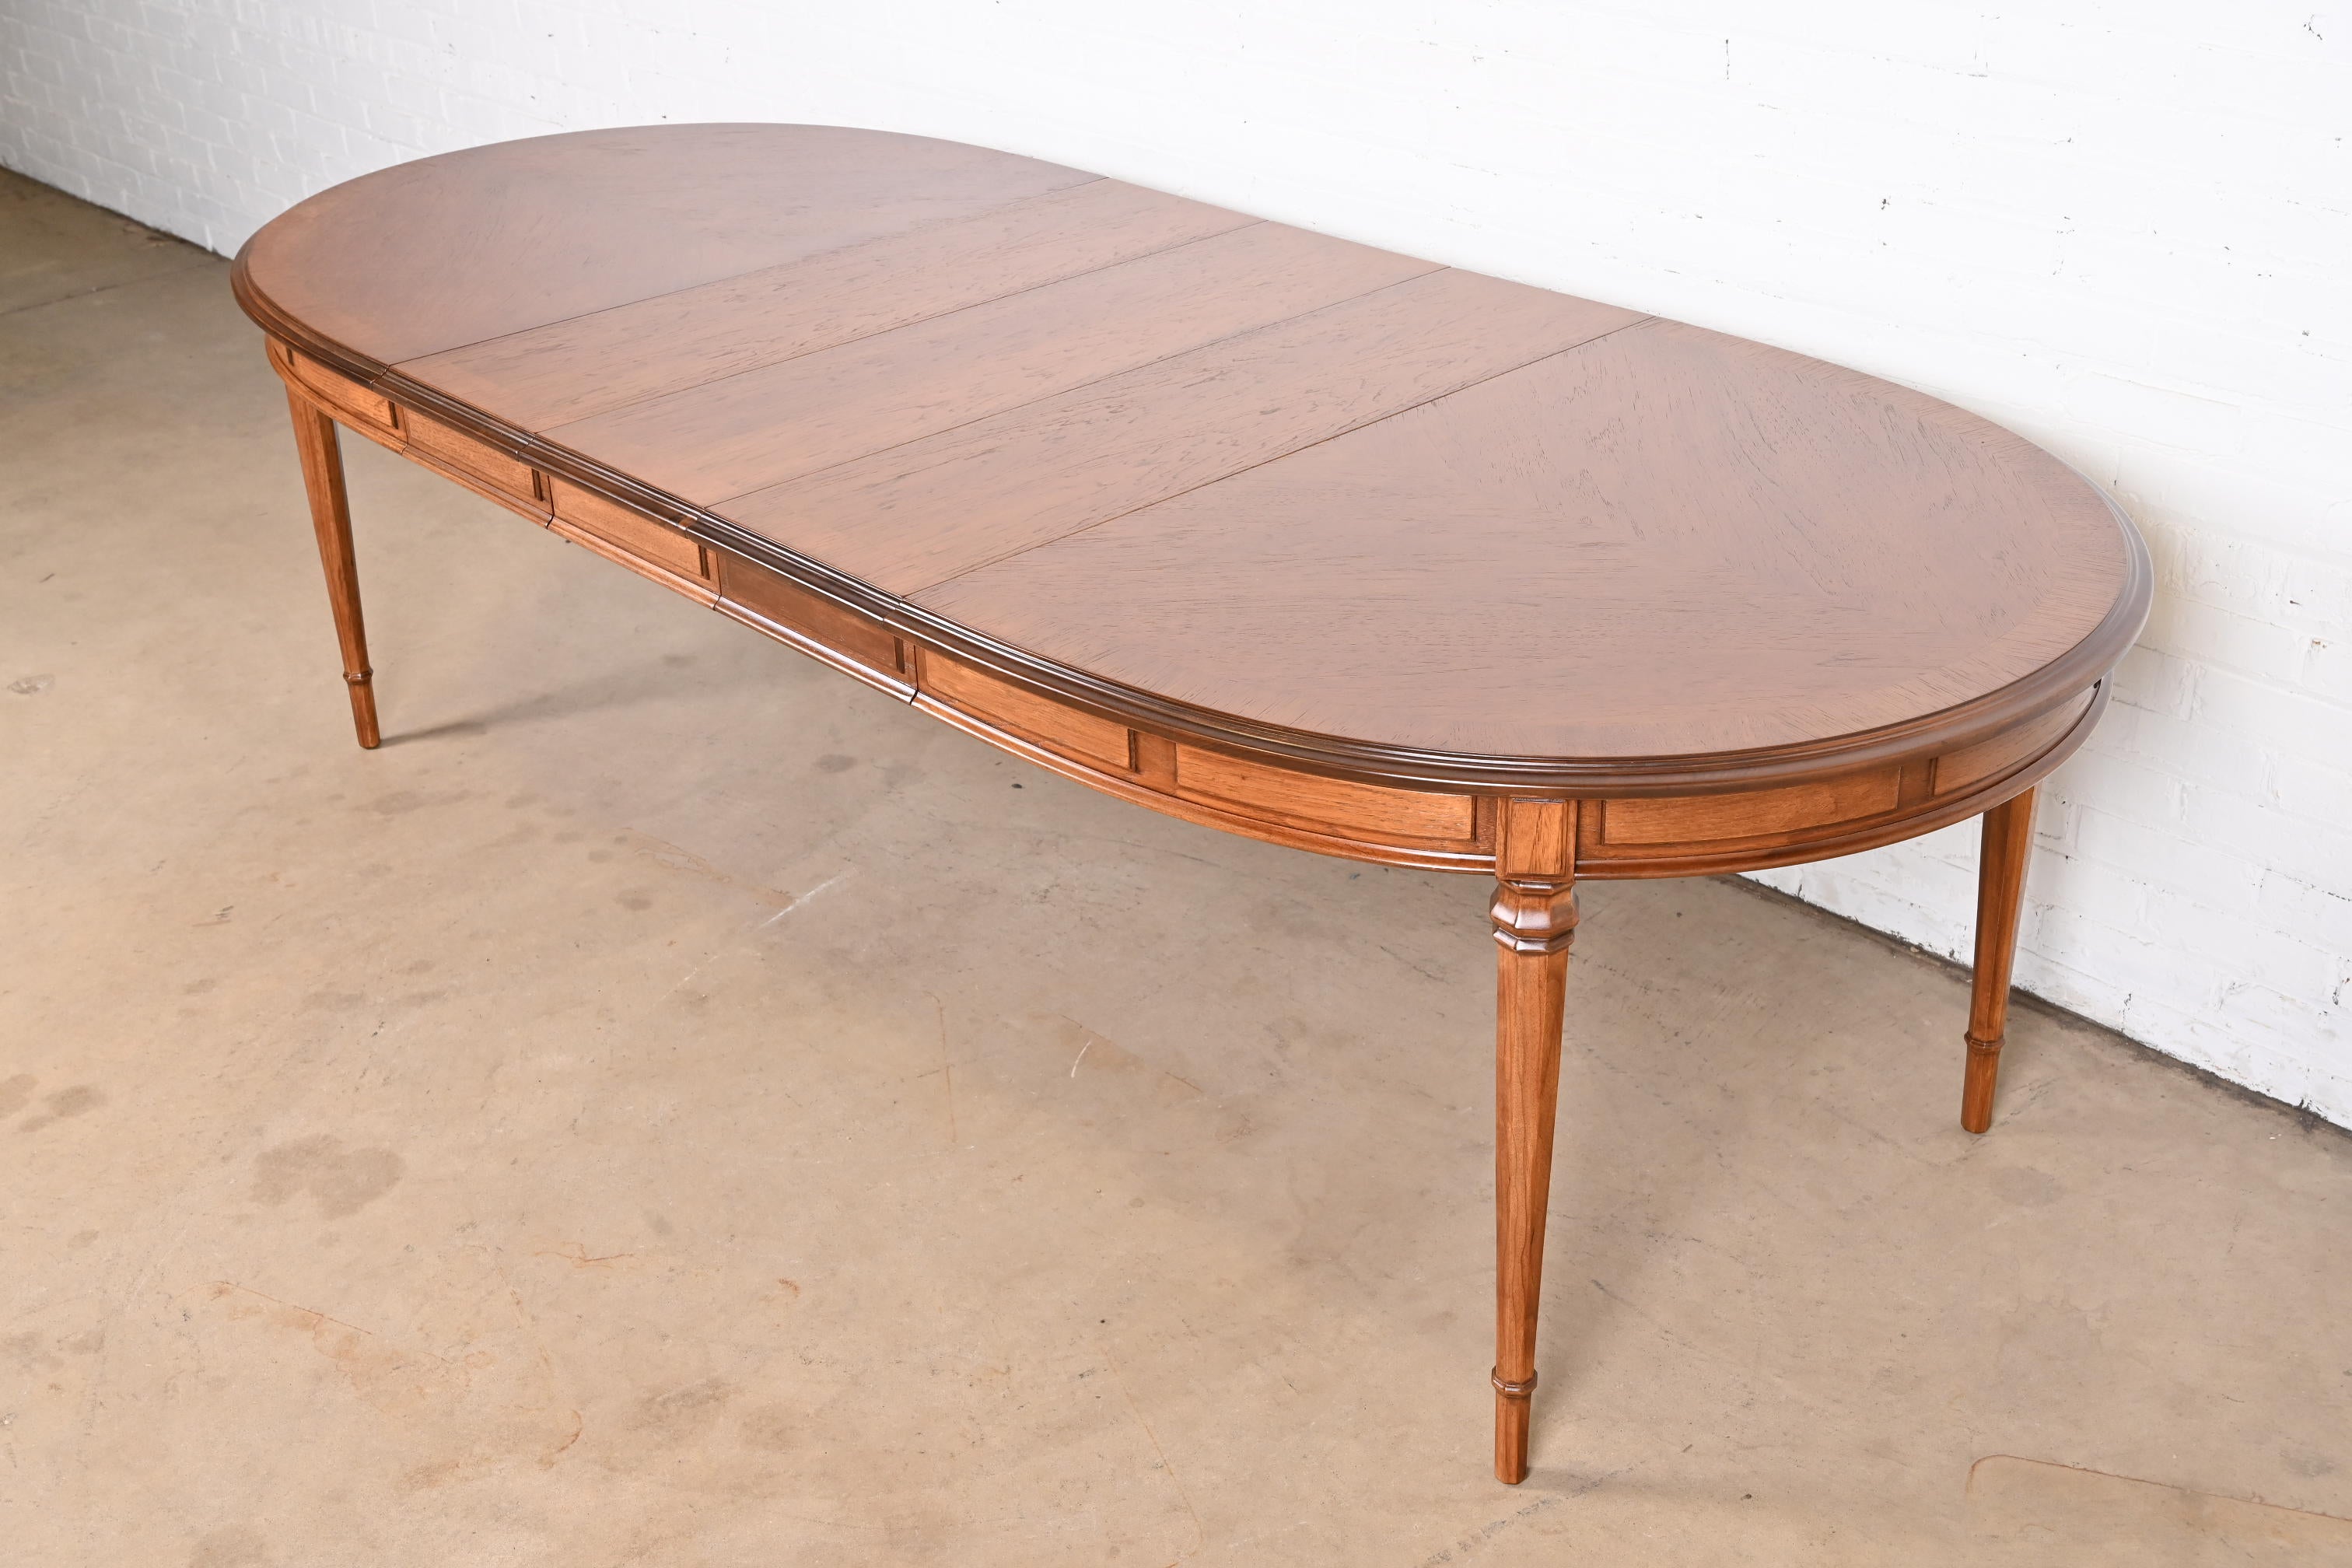 A beautiful French Regency Louis XVI style walnut extension dining table

By Drexel

USA, 1964

Measures: 64